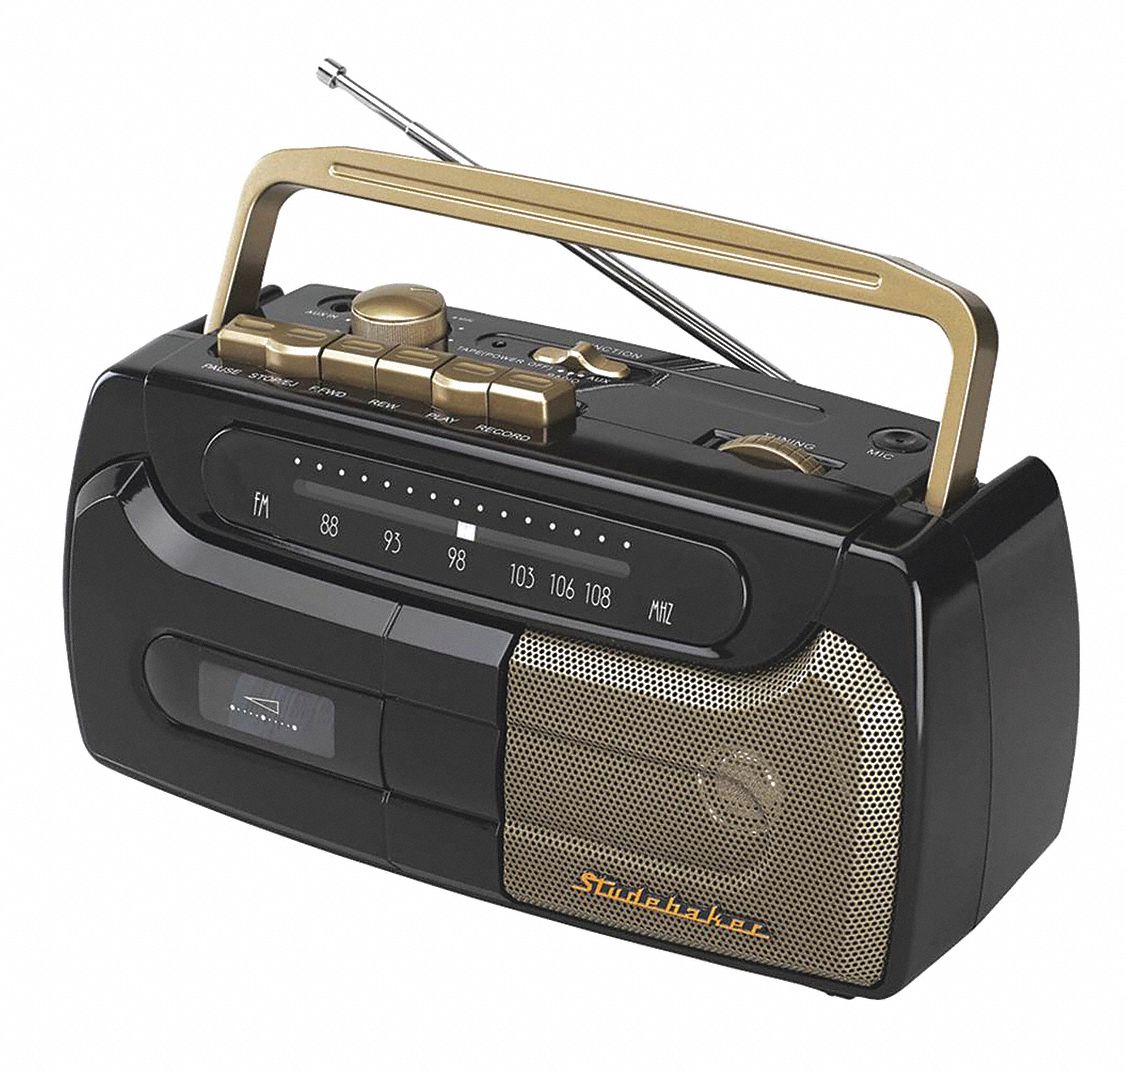 Cassette Player Recorder: AC, 0 Alarms, Black, Black, 6 in Radio Overall Wd, 6 in Radio Overall Dp